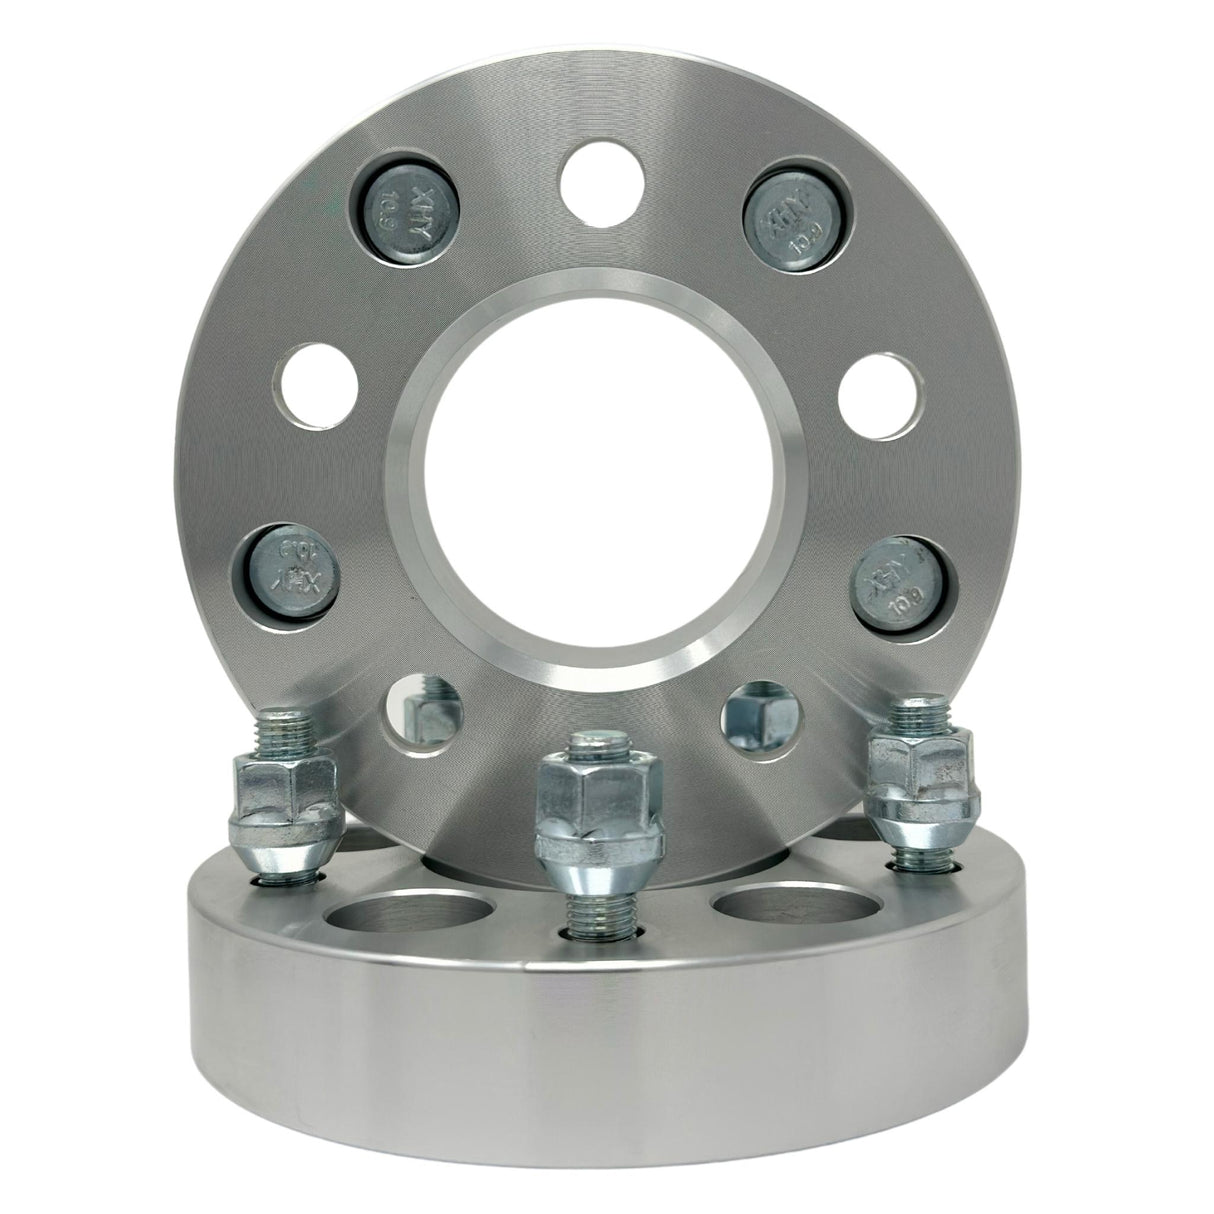 5x114.3 To 5x120.7 Wheel Adapters 1" Inch (25mm) 12x1.5 Studs & Lug Nuts 74mm Universal Center Bore | 5x4.5 to 5x4.75 spacers